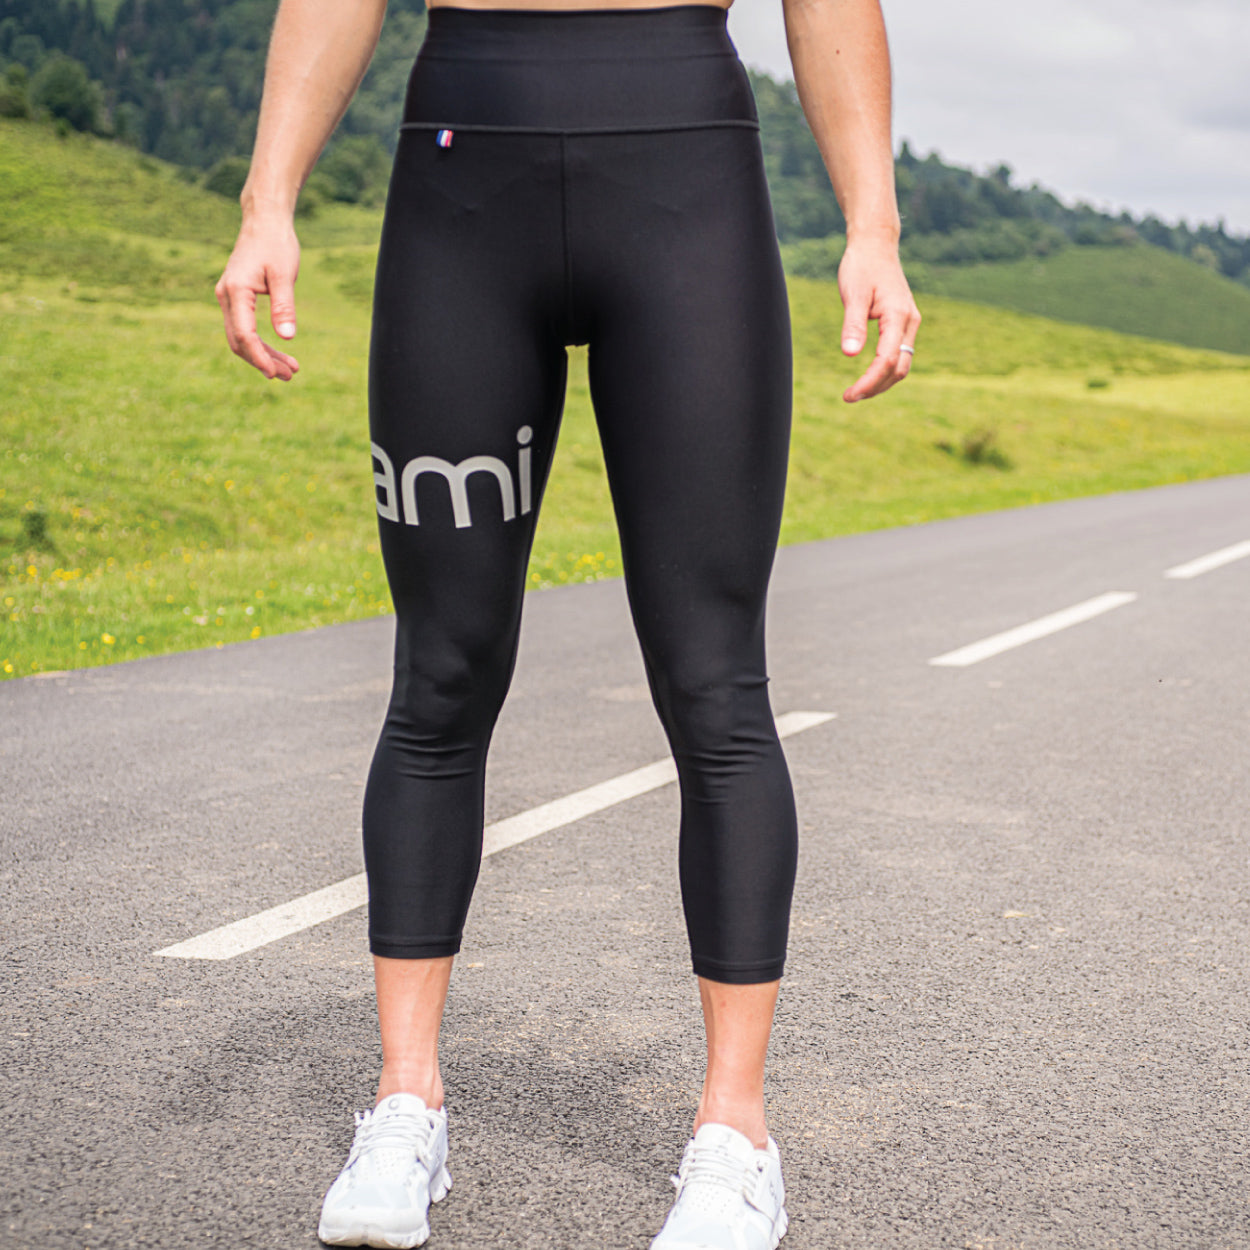 sports femme legging running course a pied fitness fabrication francaise kiwami